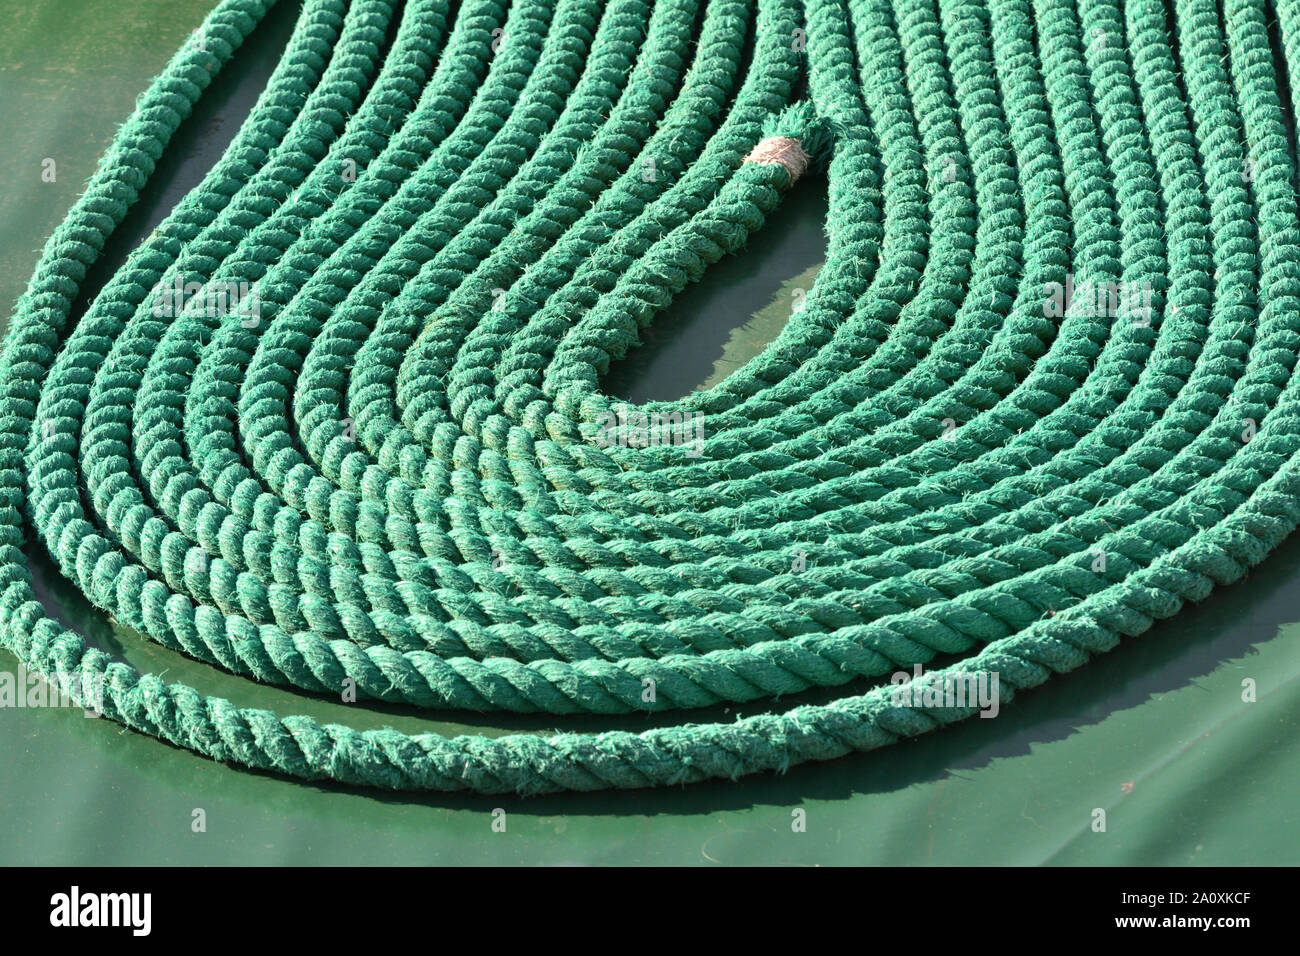 Ship's rope, neatly stowed as per good maritime practice, to avoid tripping Stock Photo